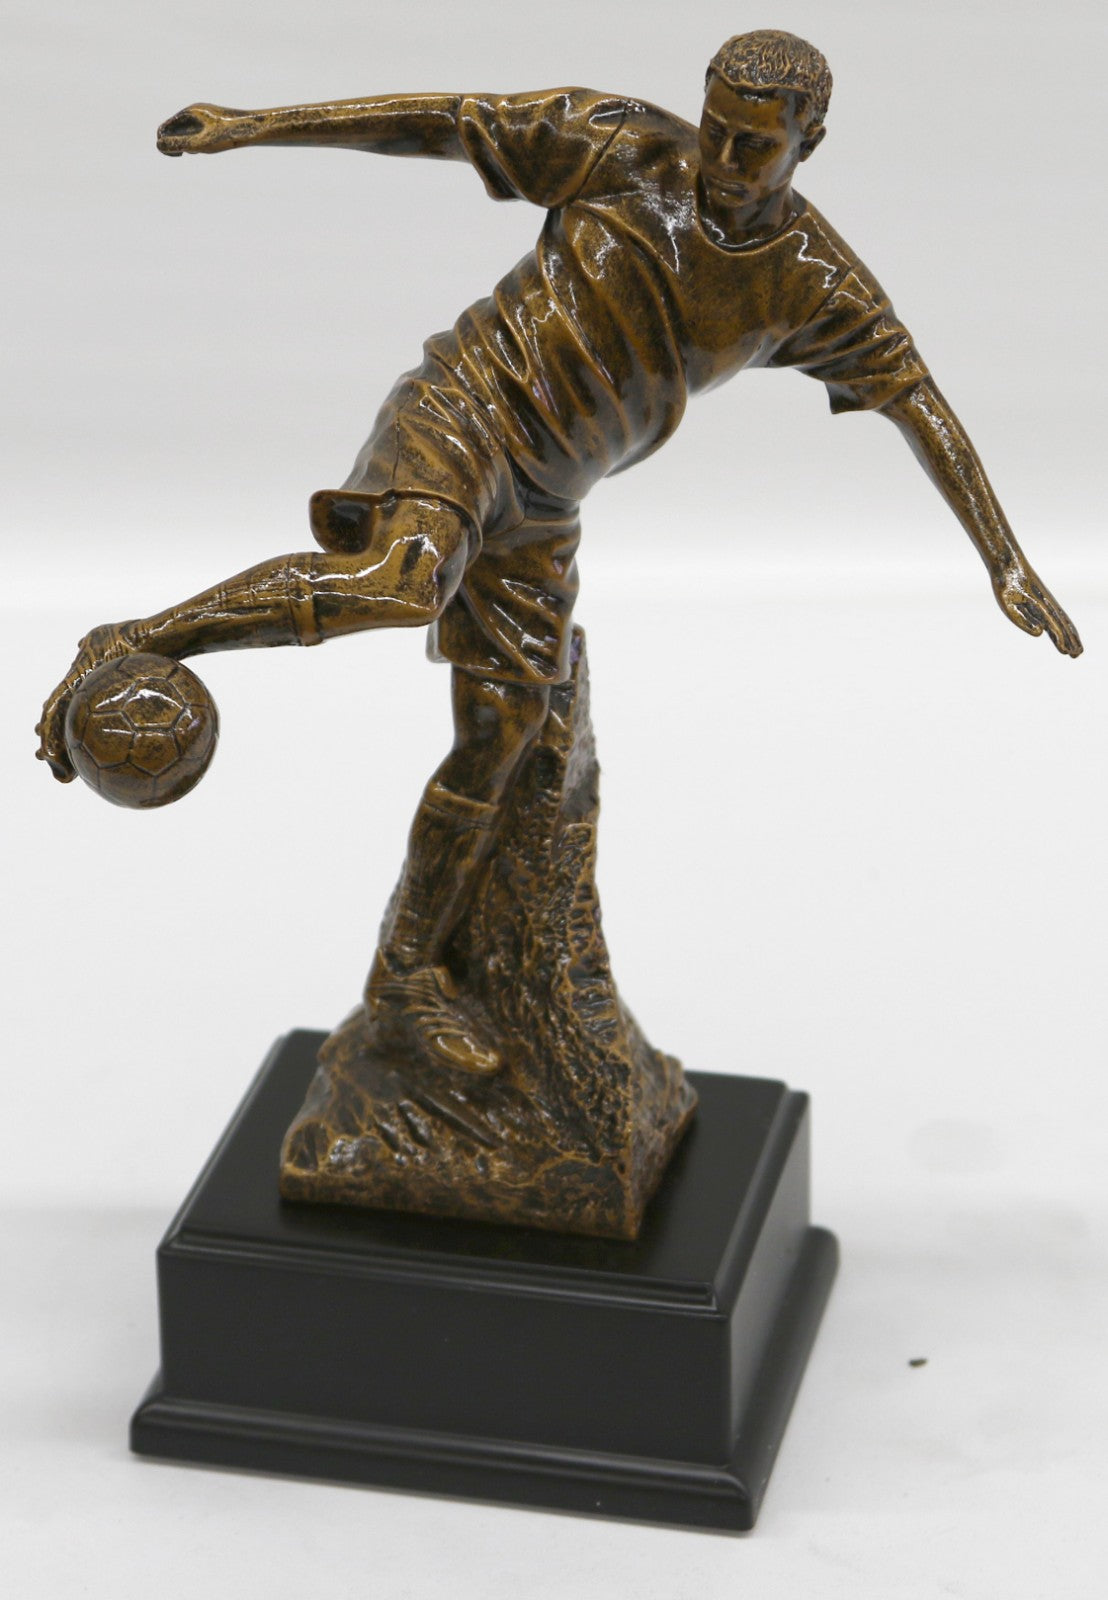 Hand Made Bronze Look Sculpture Football Soccer player Trophy Statue on Base